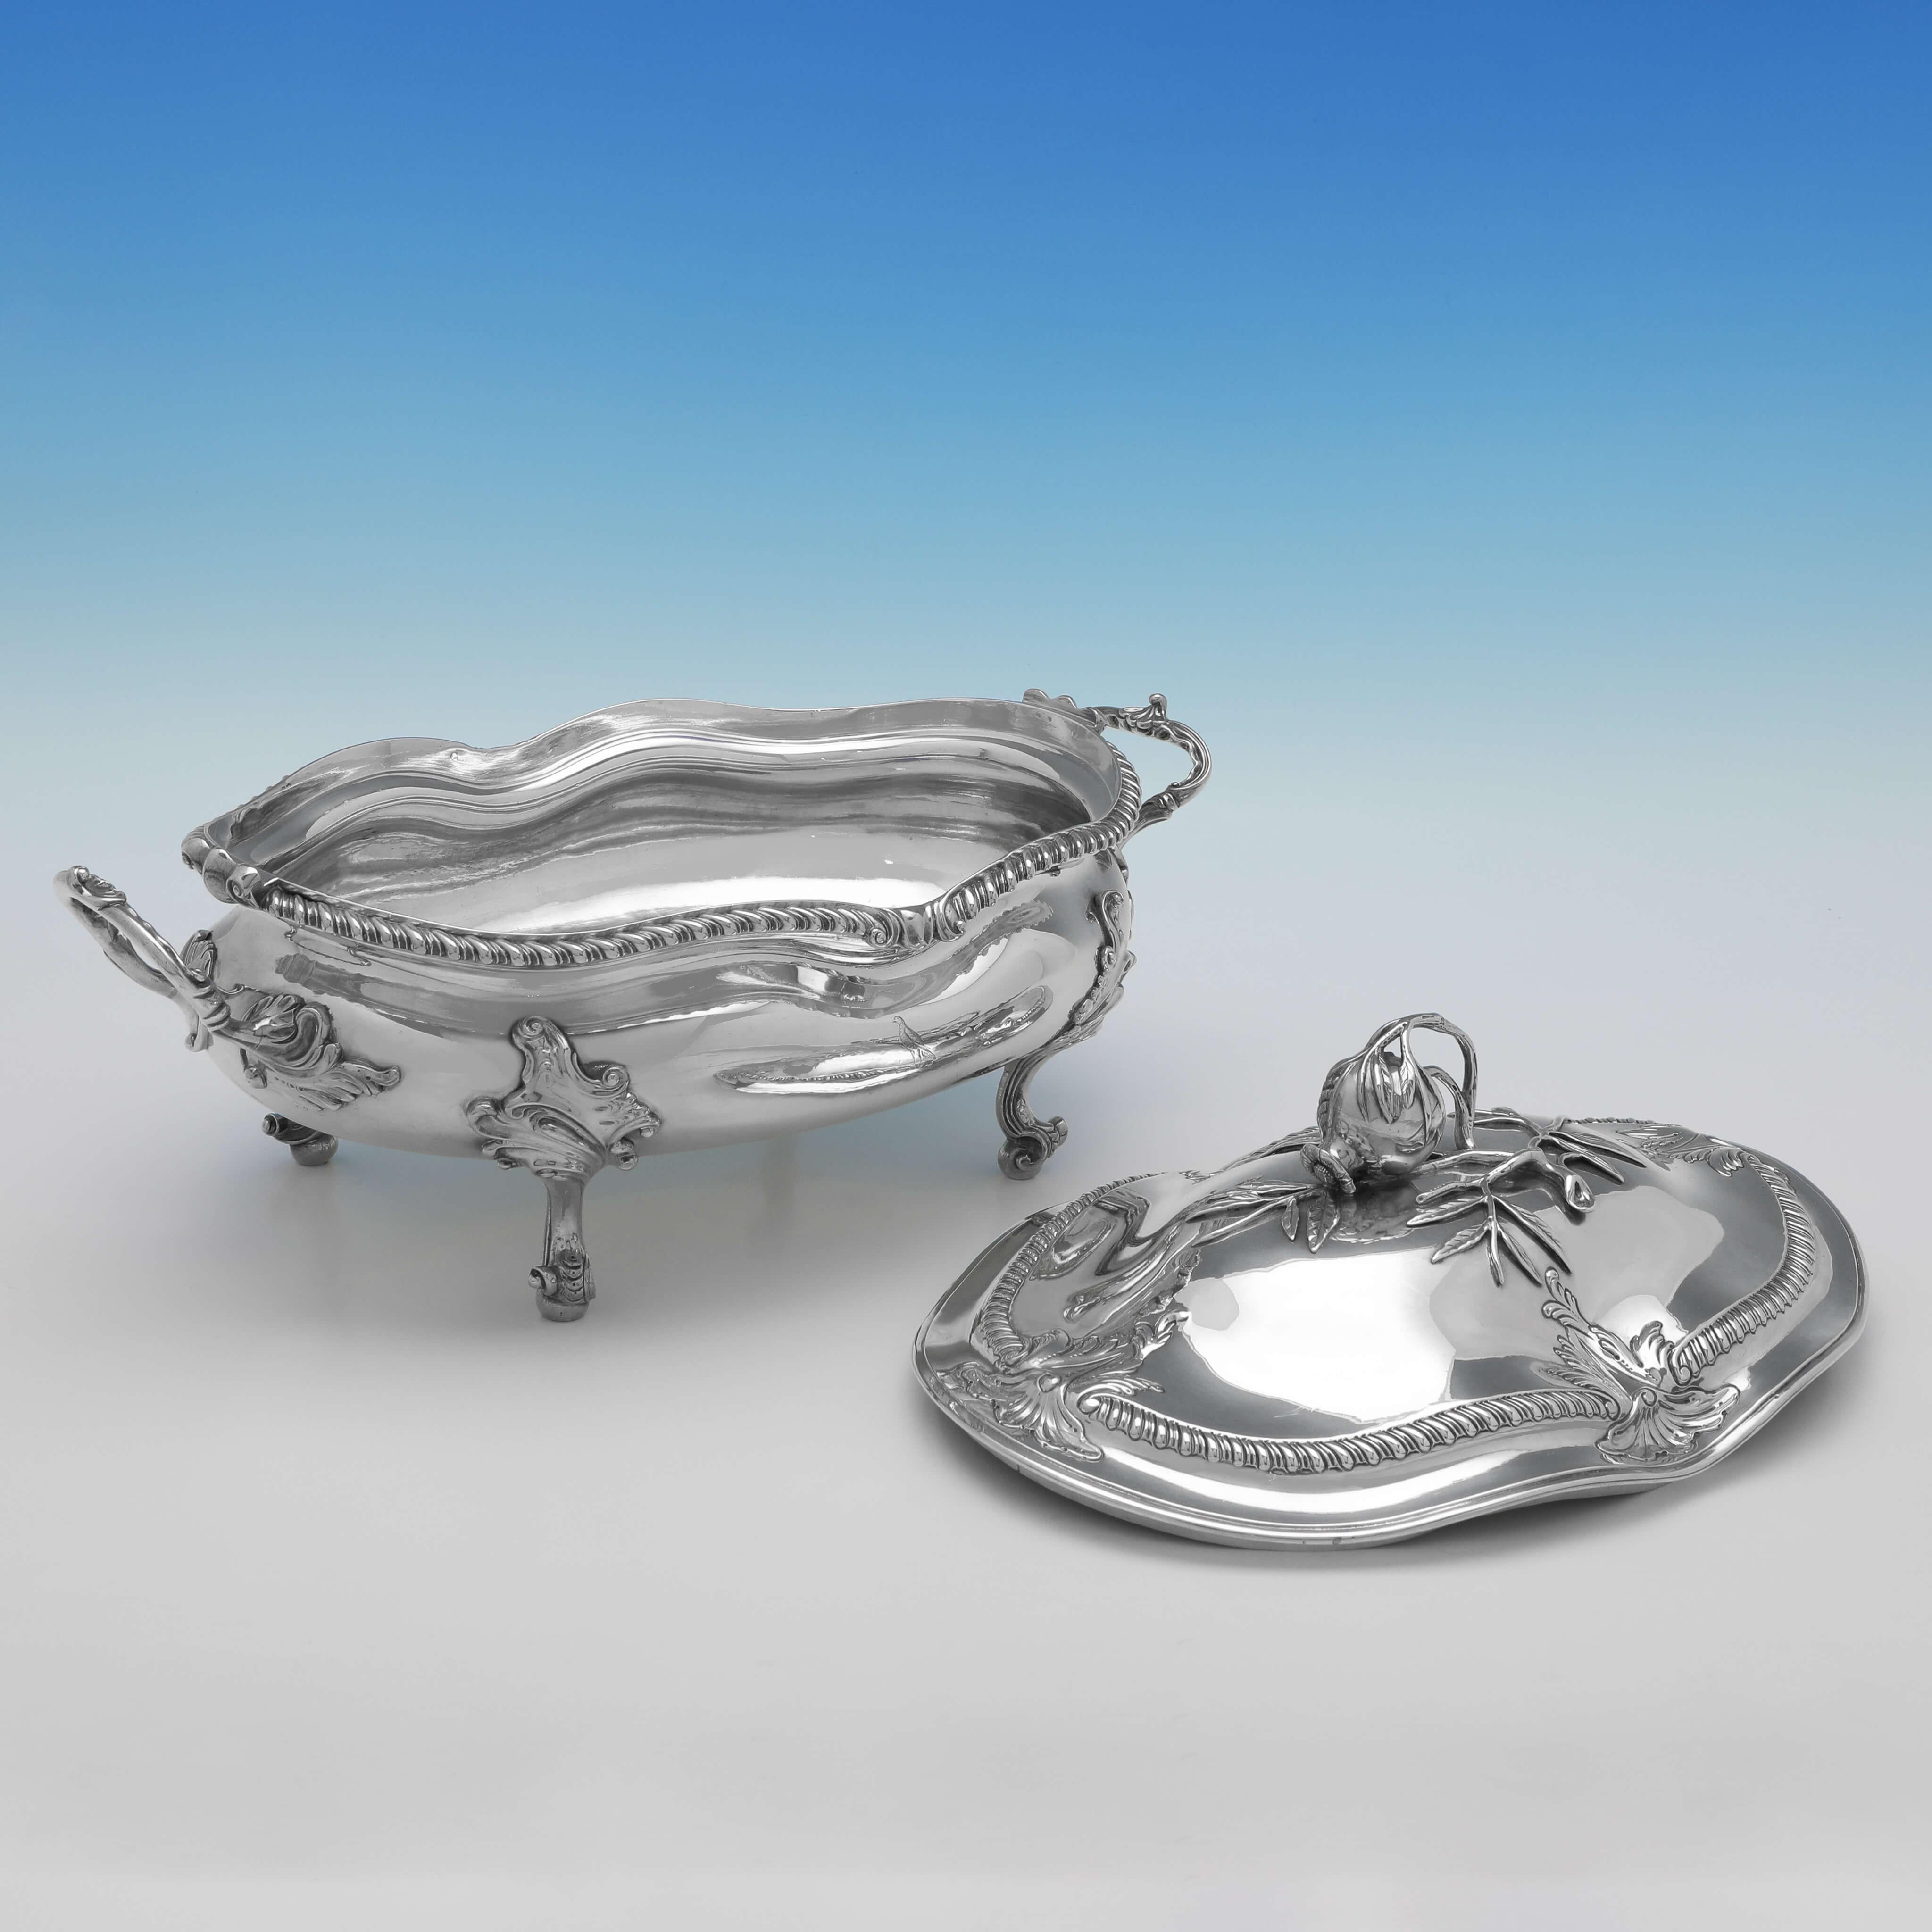 English George III Antique Sterling Silver Soup Tureen, S & J Crespell, London, 1772 For Sale